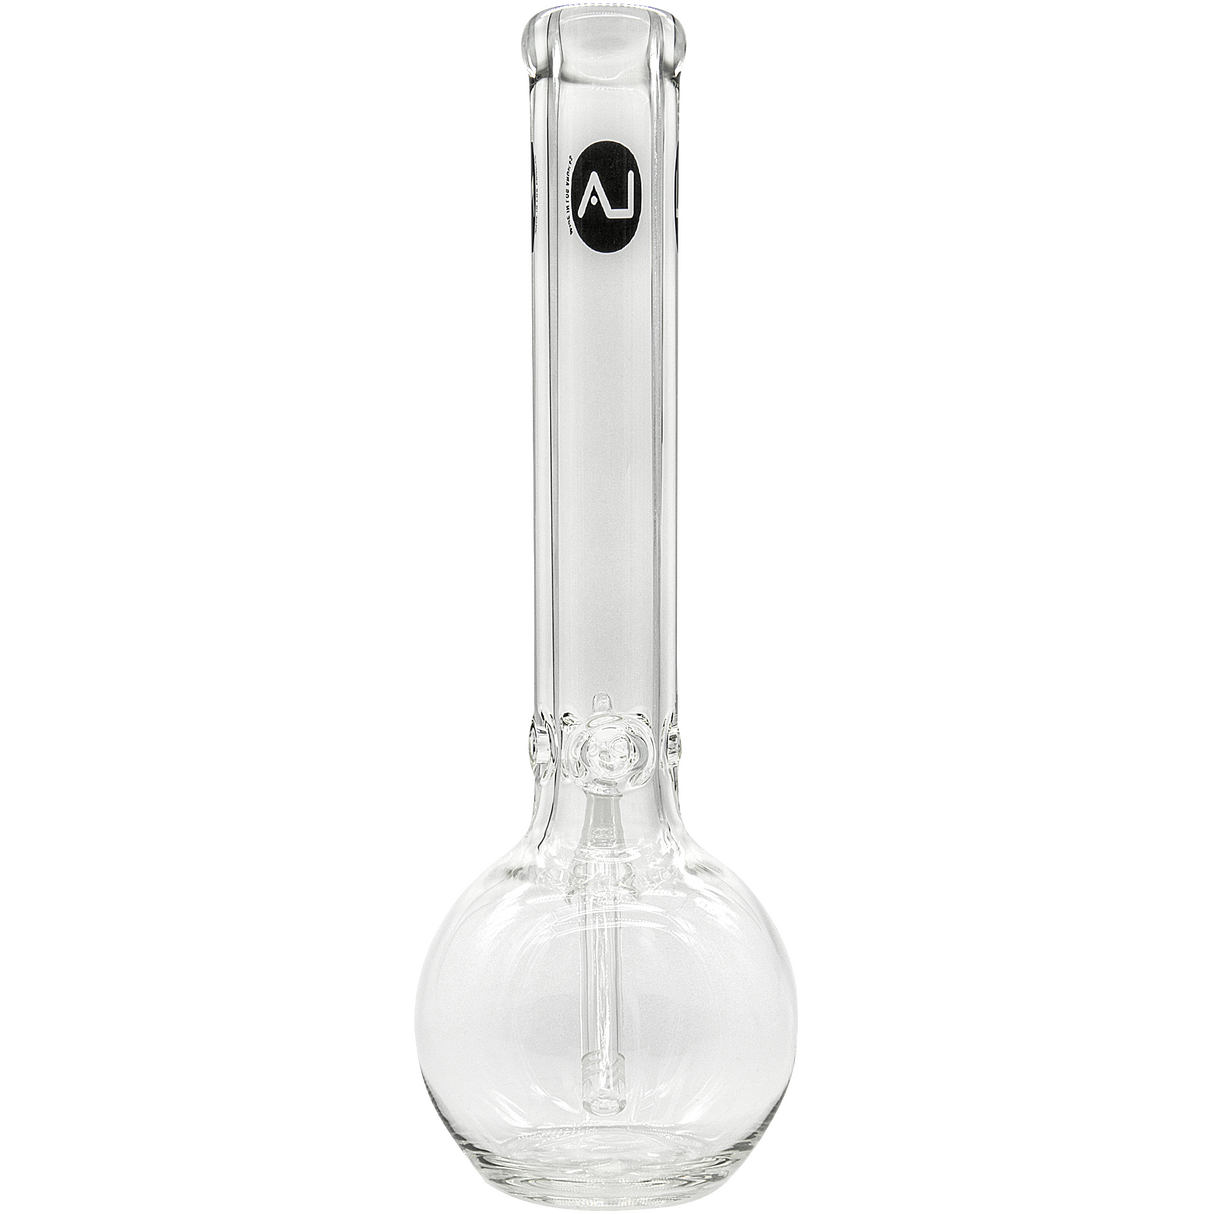 LA Pipes "Iron Mace" Heavy 9mm Bubble Bong, 18" Height, 45 Degree Joint, Front View